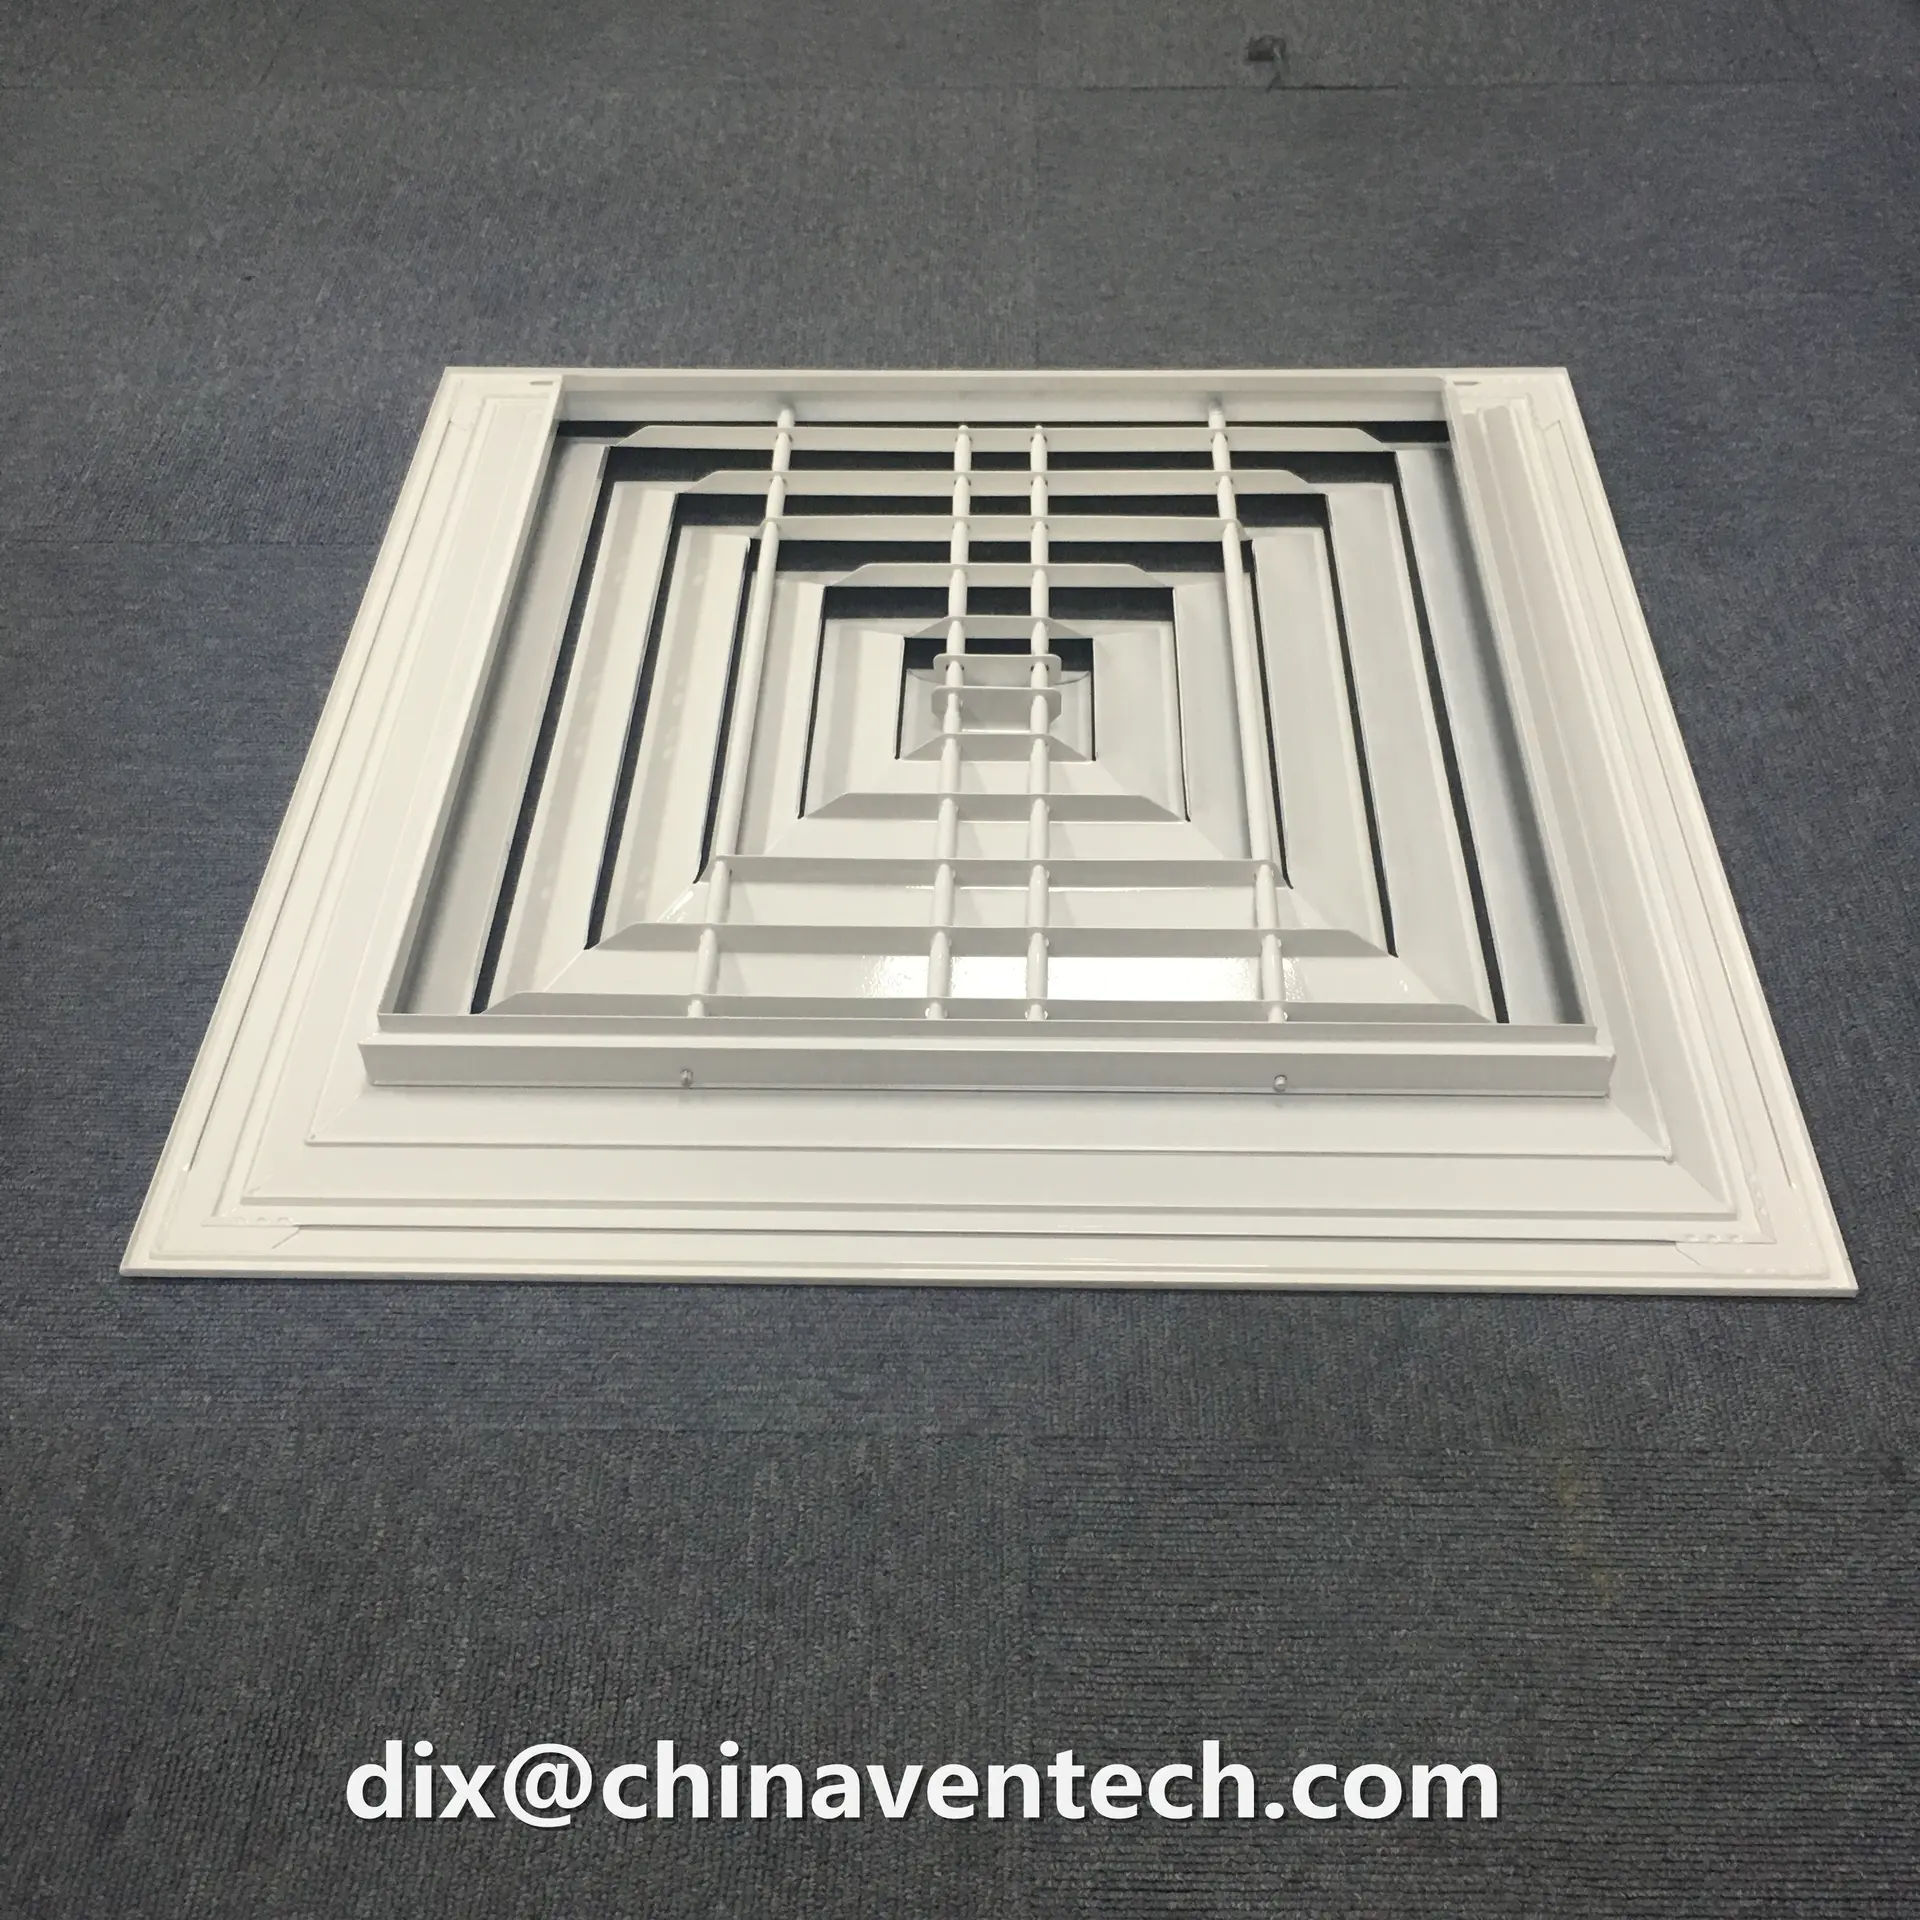 Hvac ceiling mounted ventilation 4 way square air diffuser